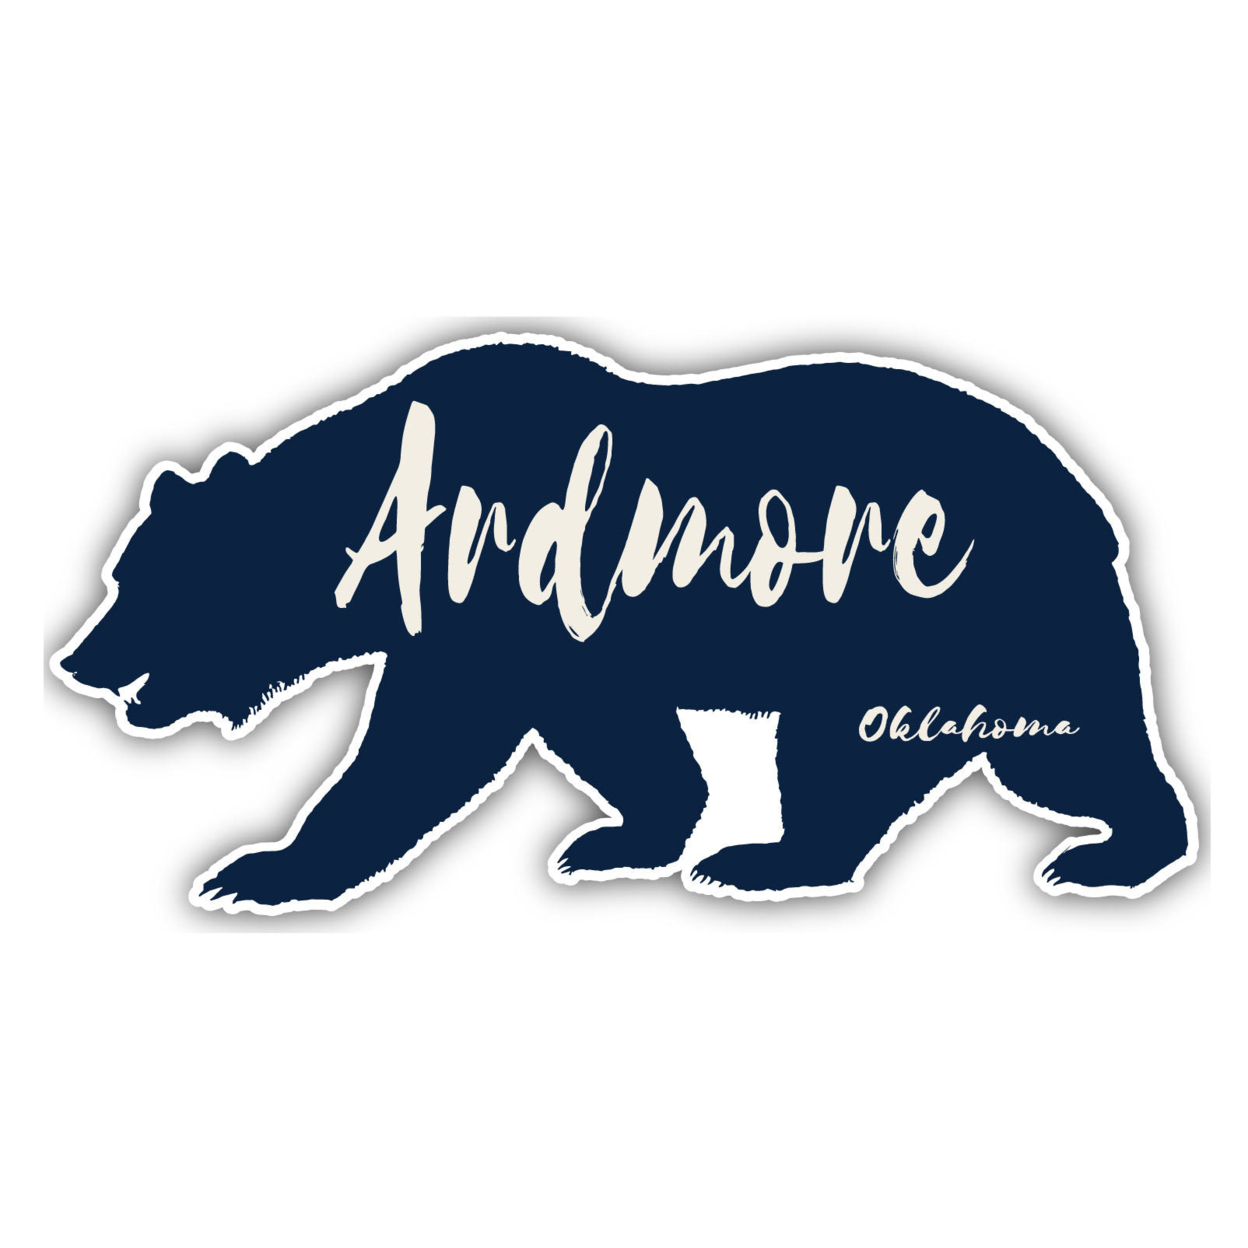 Ardmore Oklahoma Souvenir Decorative Stickers (Choose Theme And Size) - 4-Pack, 10-Inch, Tent